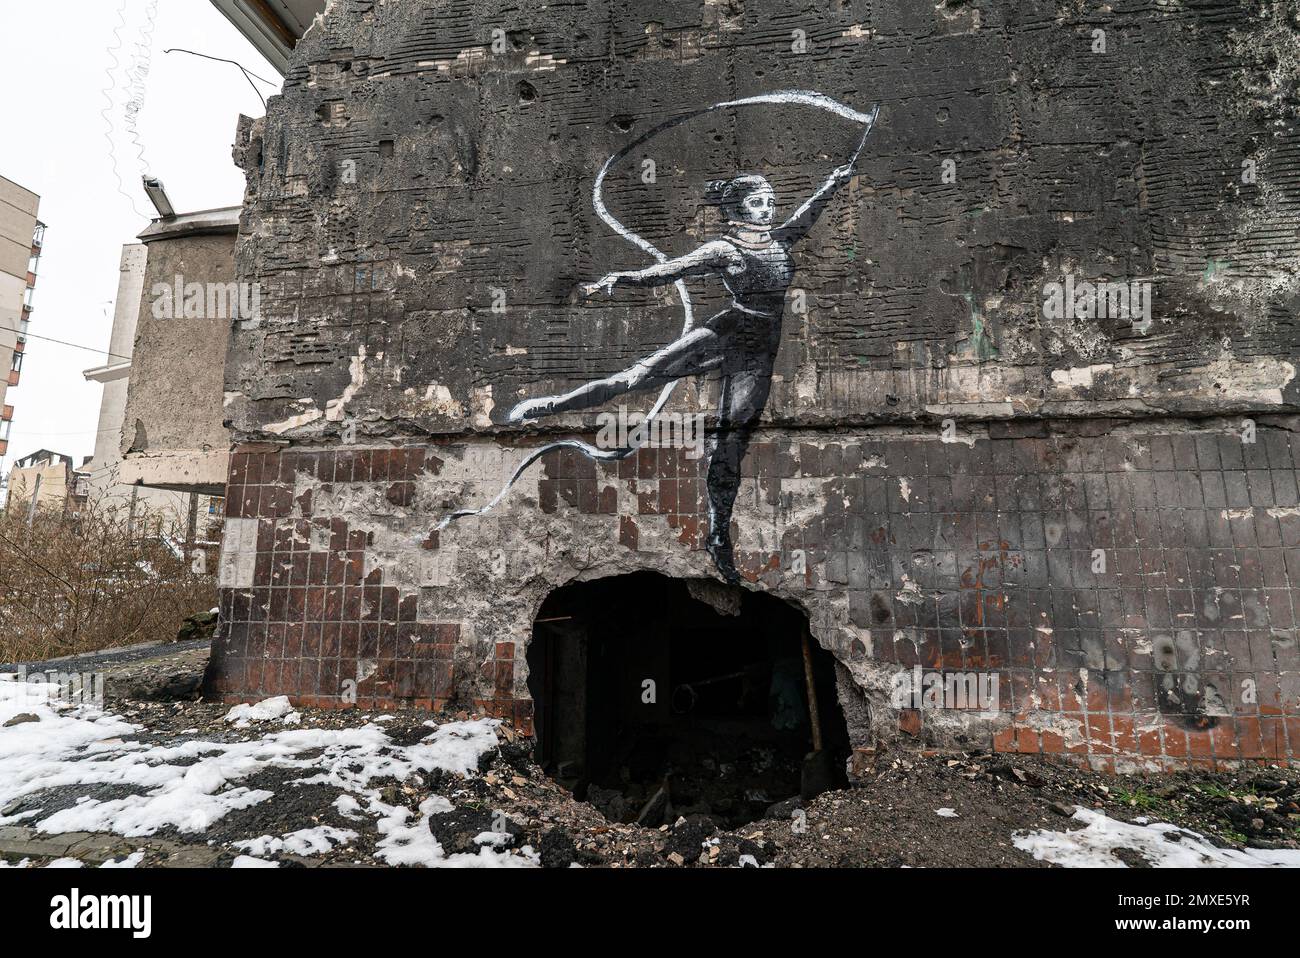 IRPIN, UKRAINE - NOVEMBER 29, 2022: Graffiti by Banksy on a destroyed house in Irpin, Ukraine Stock Photo